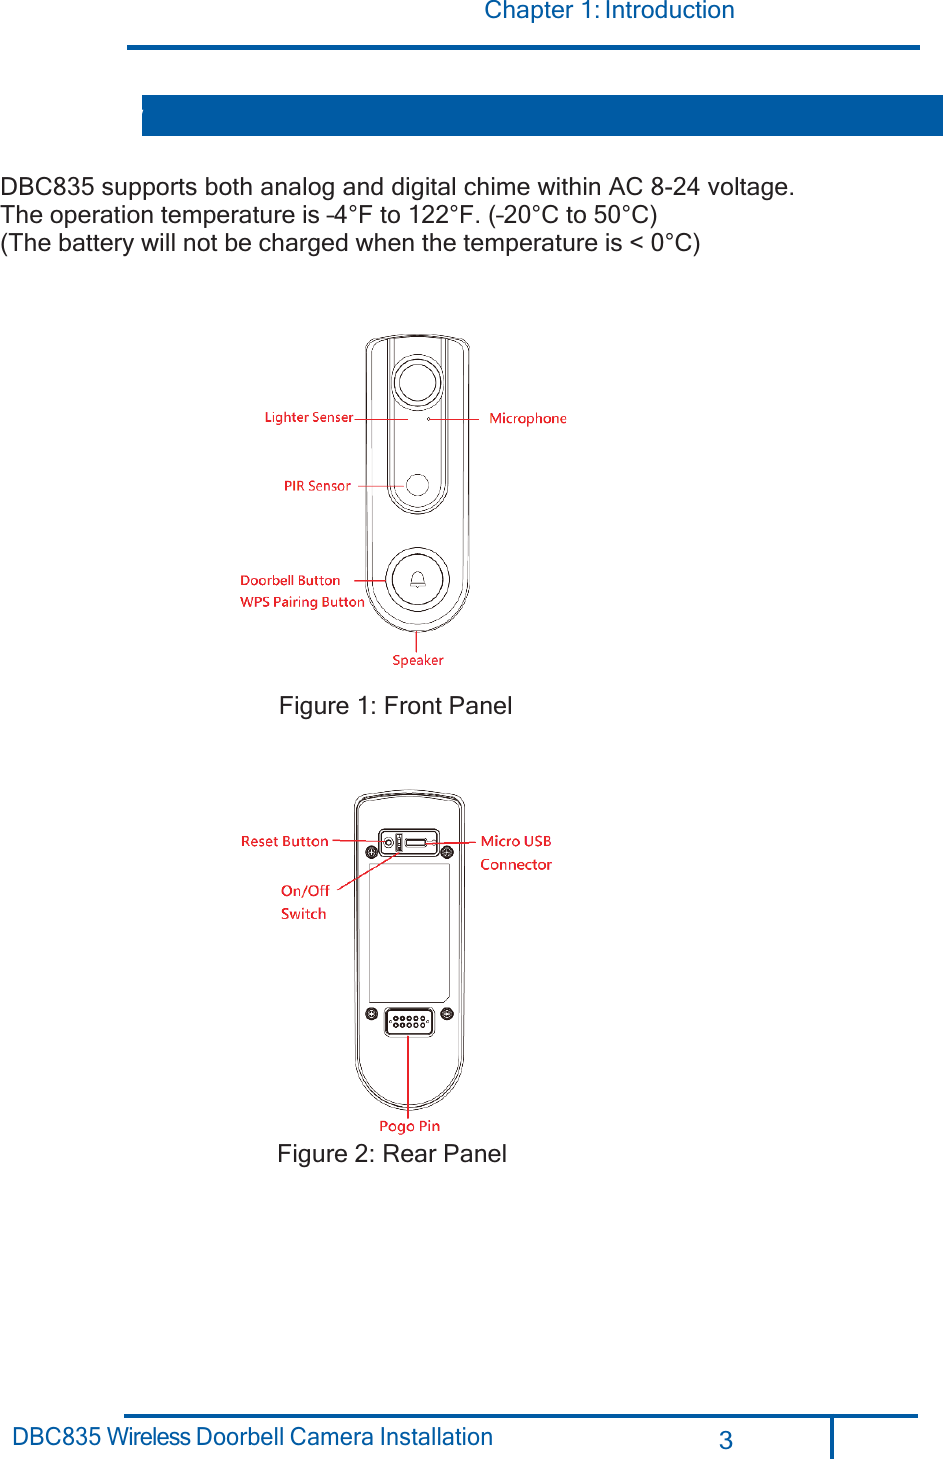 Chapter 1: Introduction 3 DBC835 Wireless Doorbell Camera Installation       DBC835 supports both analog and digital chime within AC 8-24 voltage. The operation temperature is –4°F to 122°F. (–20°C to 50°C)  (The battery will not be charged when the temperature is &lt; 0°C)    Figure 1: Front Panel   Figure 2: Rear Panel Overview 